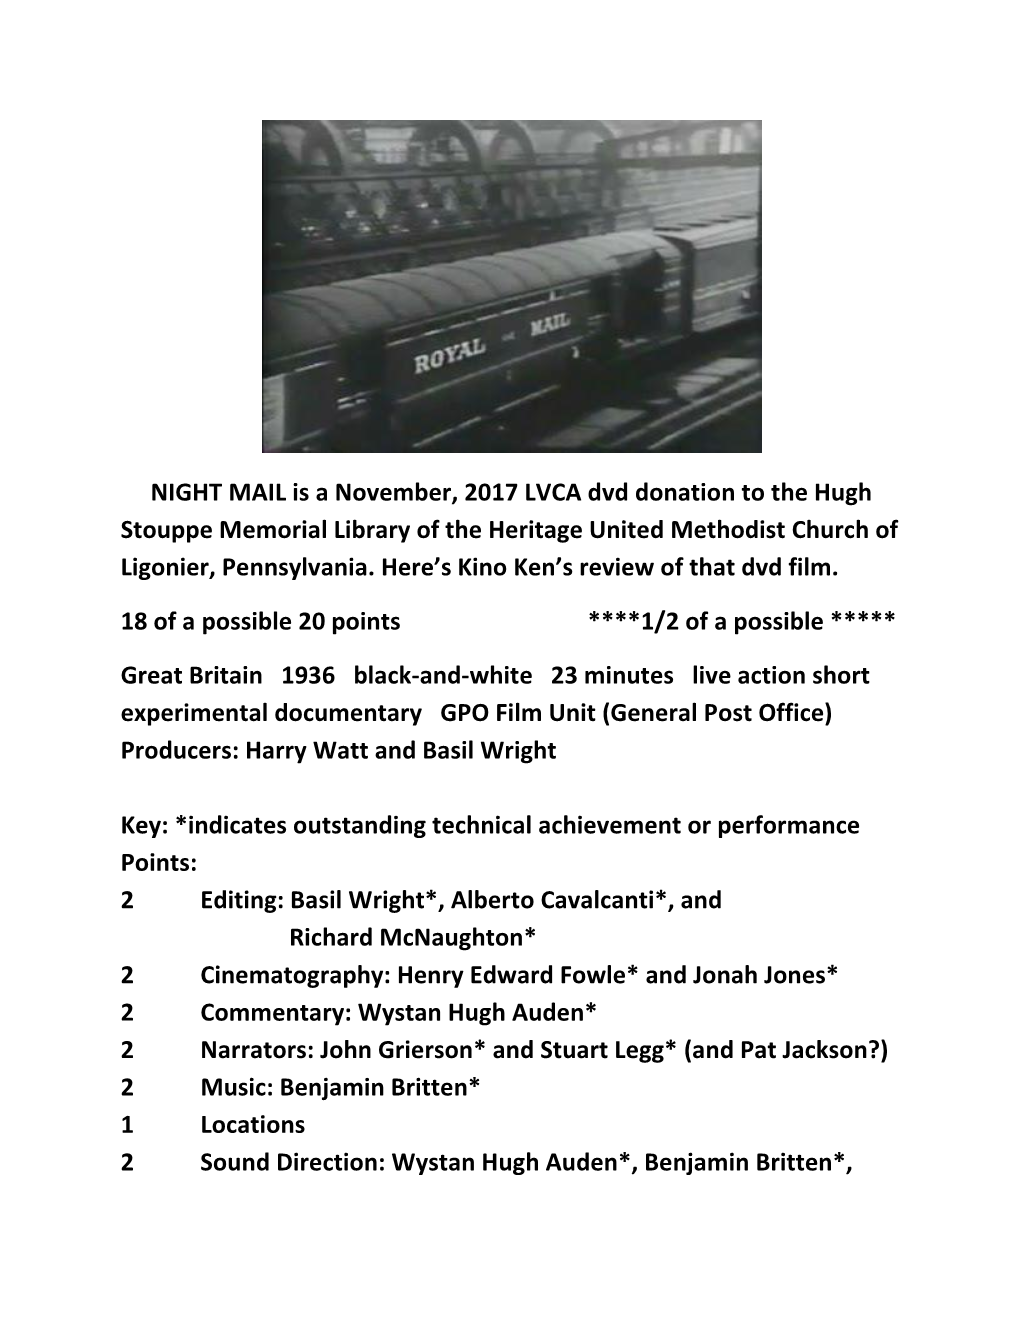 NIGHT MAIL Is a November, 2017 LVCA Dvd Donation to the Hugh Stouppe Memorial Library of the Heritage United Methodist Church of Ligonier, Pennsylvania